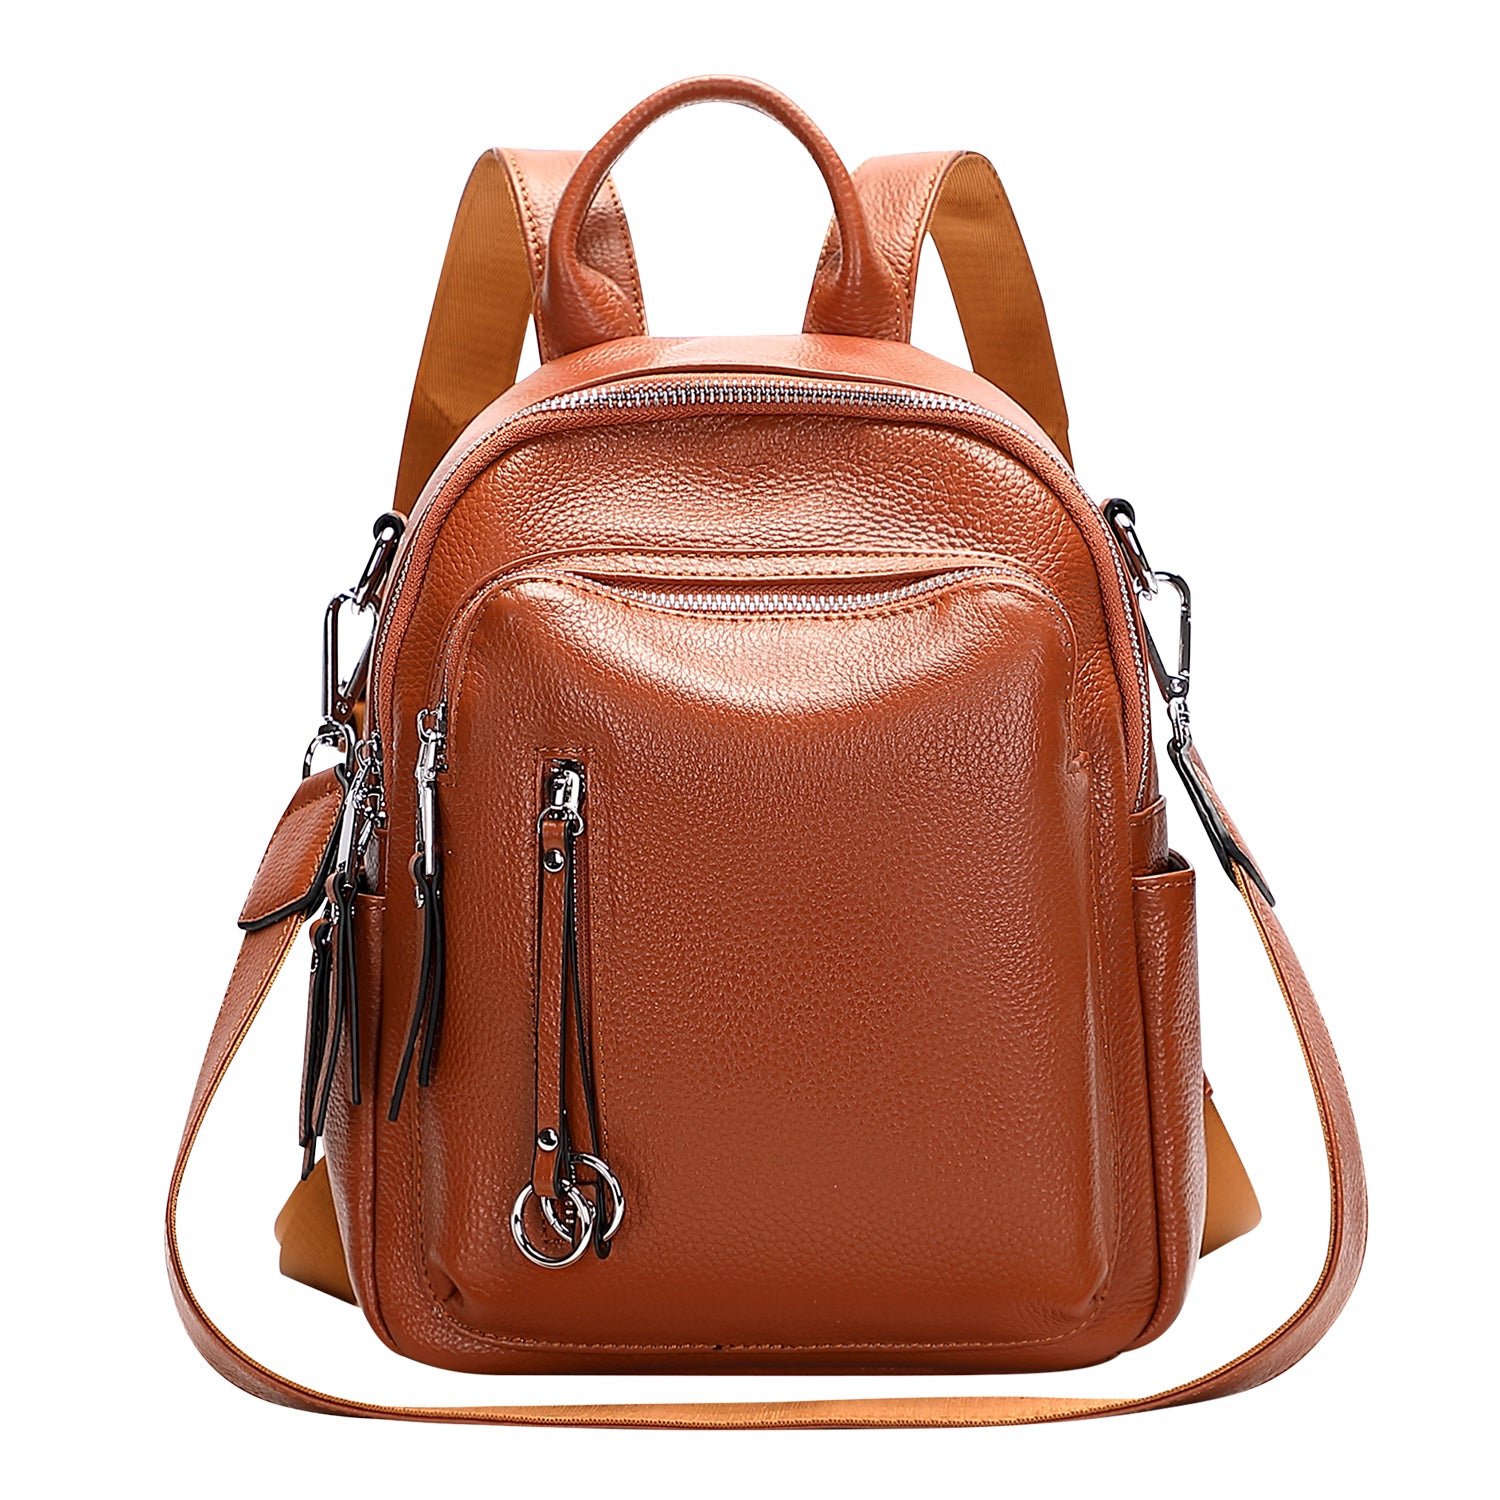 Leather Convertible Backpack Purse, Leather Backpack, Leather Tote - Mayko  Bags